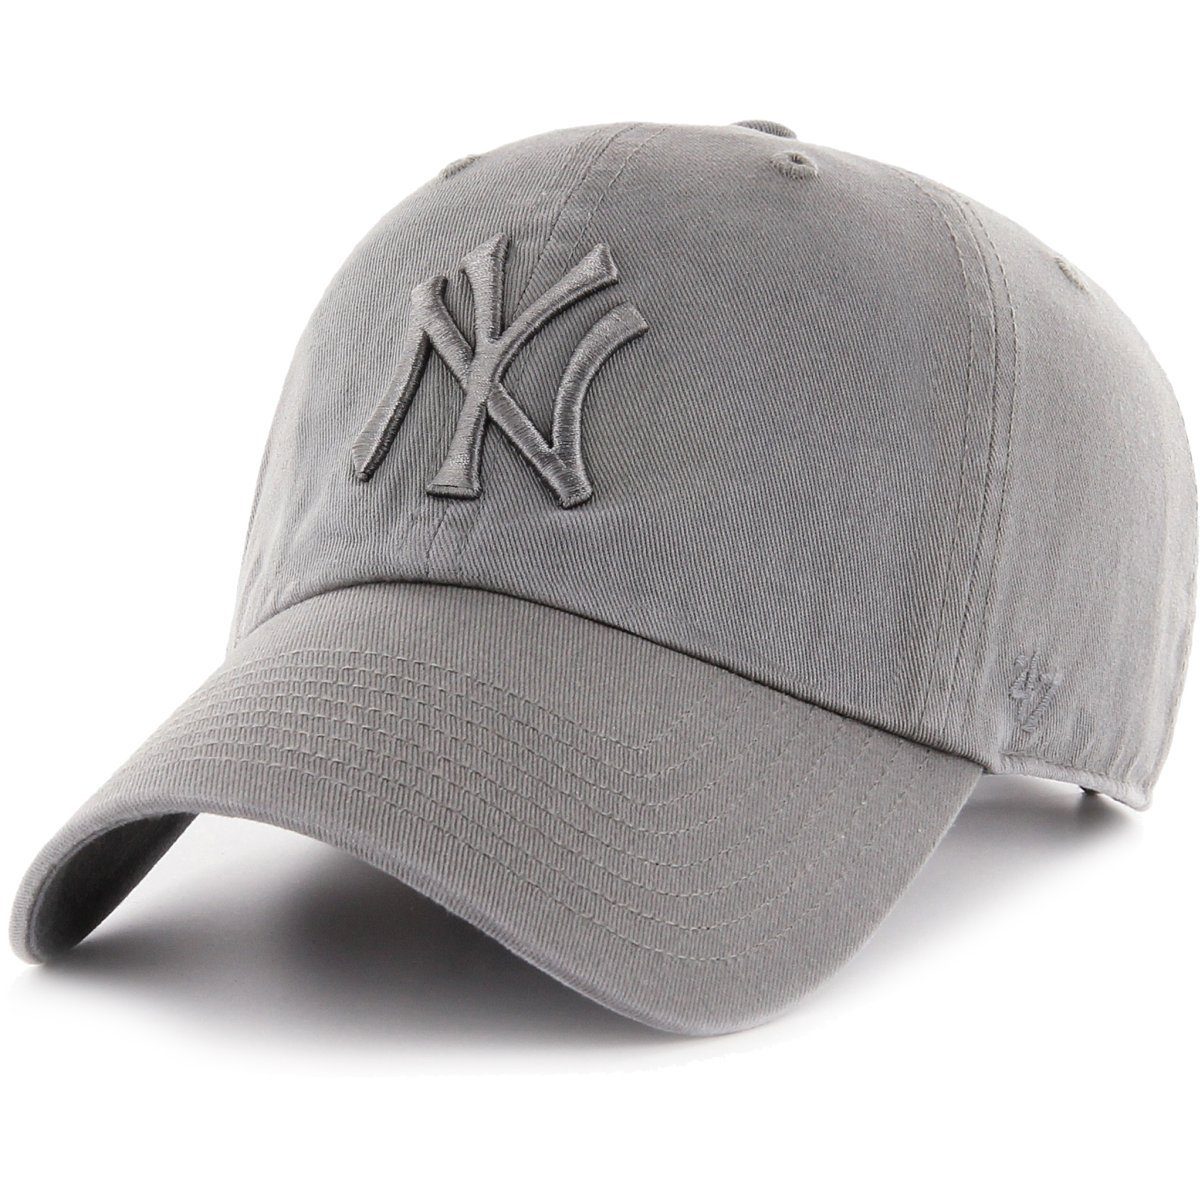 x27;47 Brand Baseball New Fit CLEAN Yankees Relaxed York UP Cap